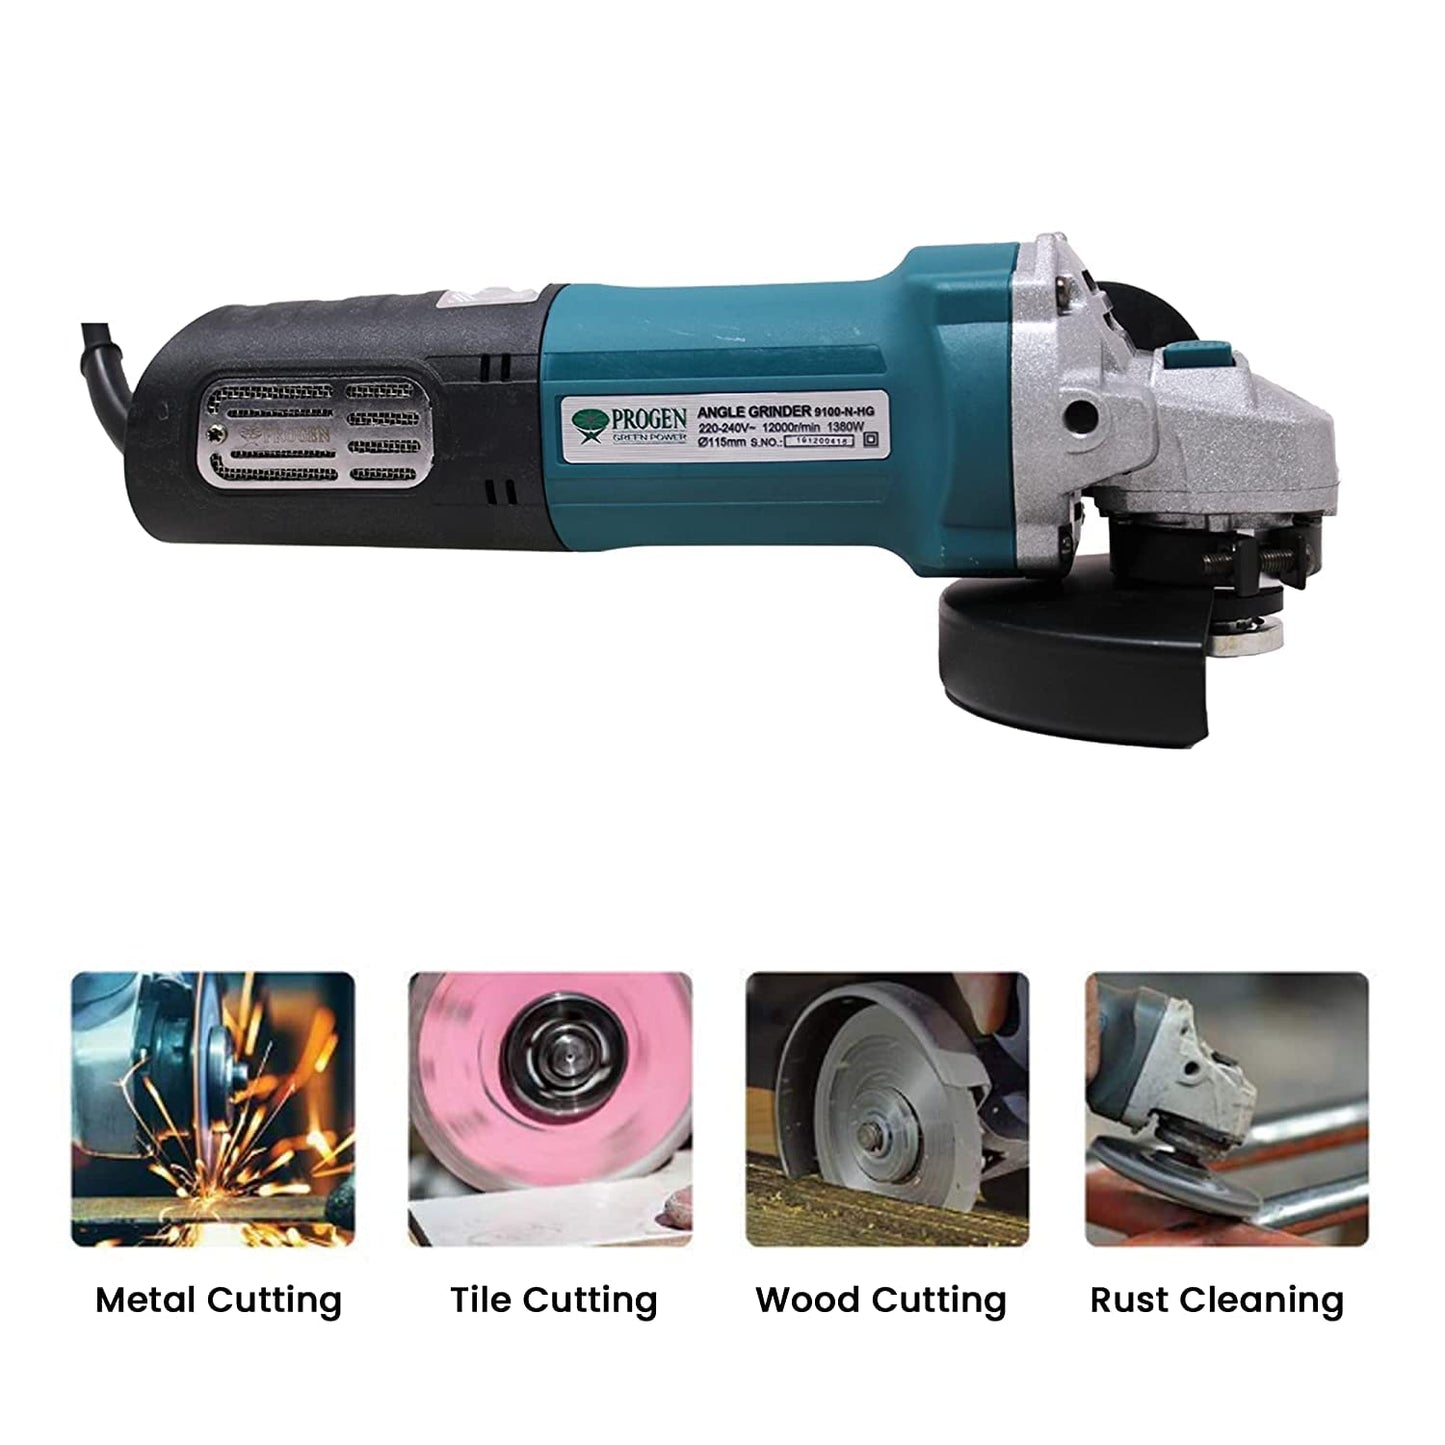 PROGEN 9100-NHG, 1380W, 115mm Heavyduty 4.5 Inch Angle Grinder for Grinding, Cutting, Sharpening, Polishing, Removing Rust (12000Rpm)